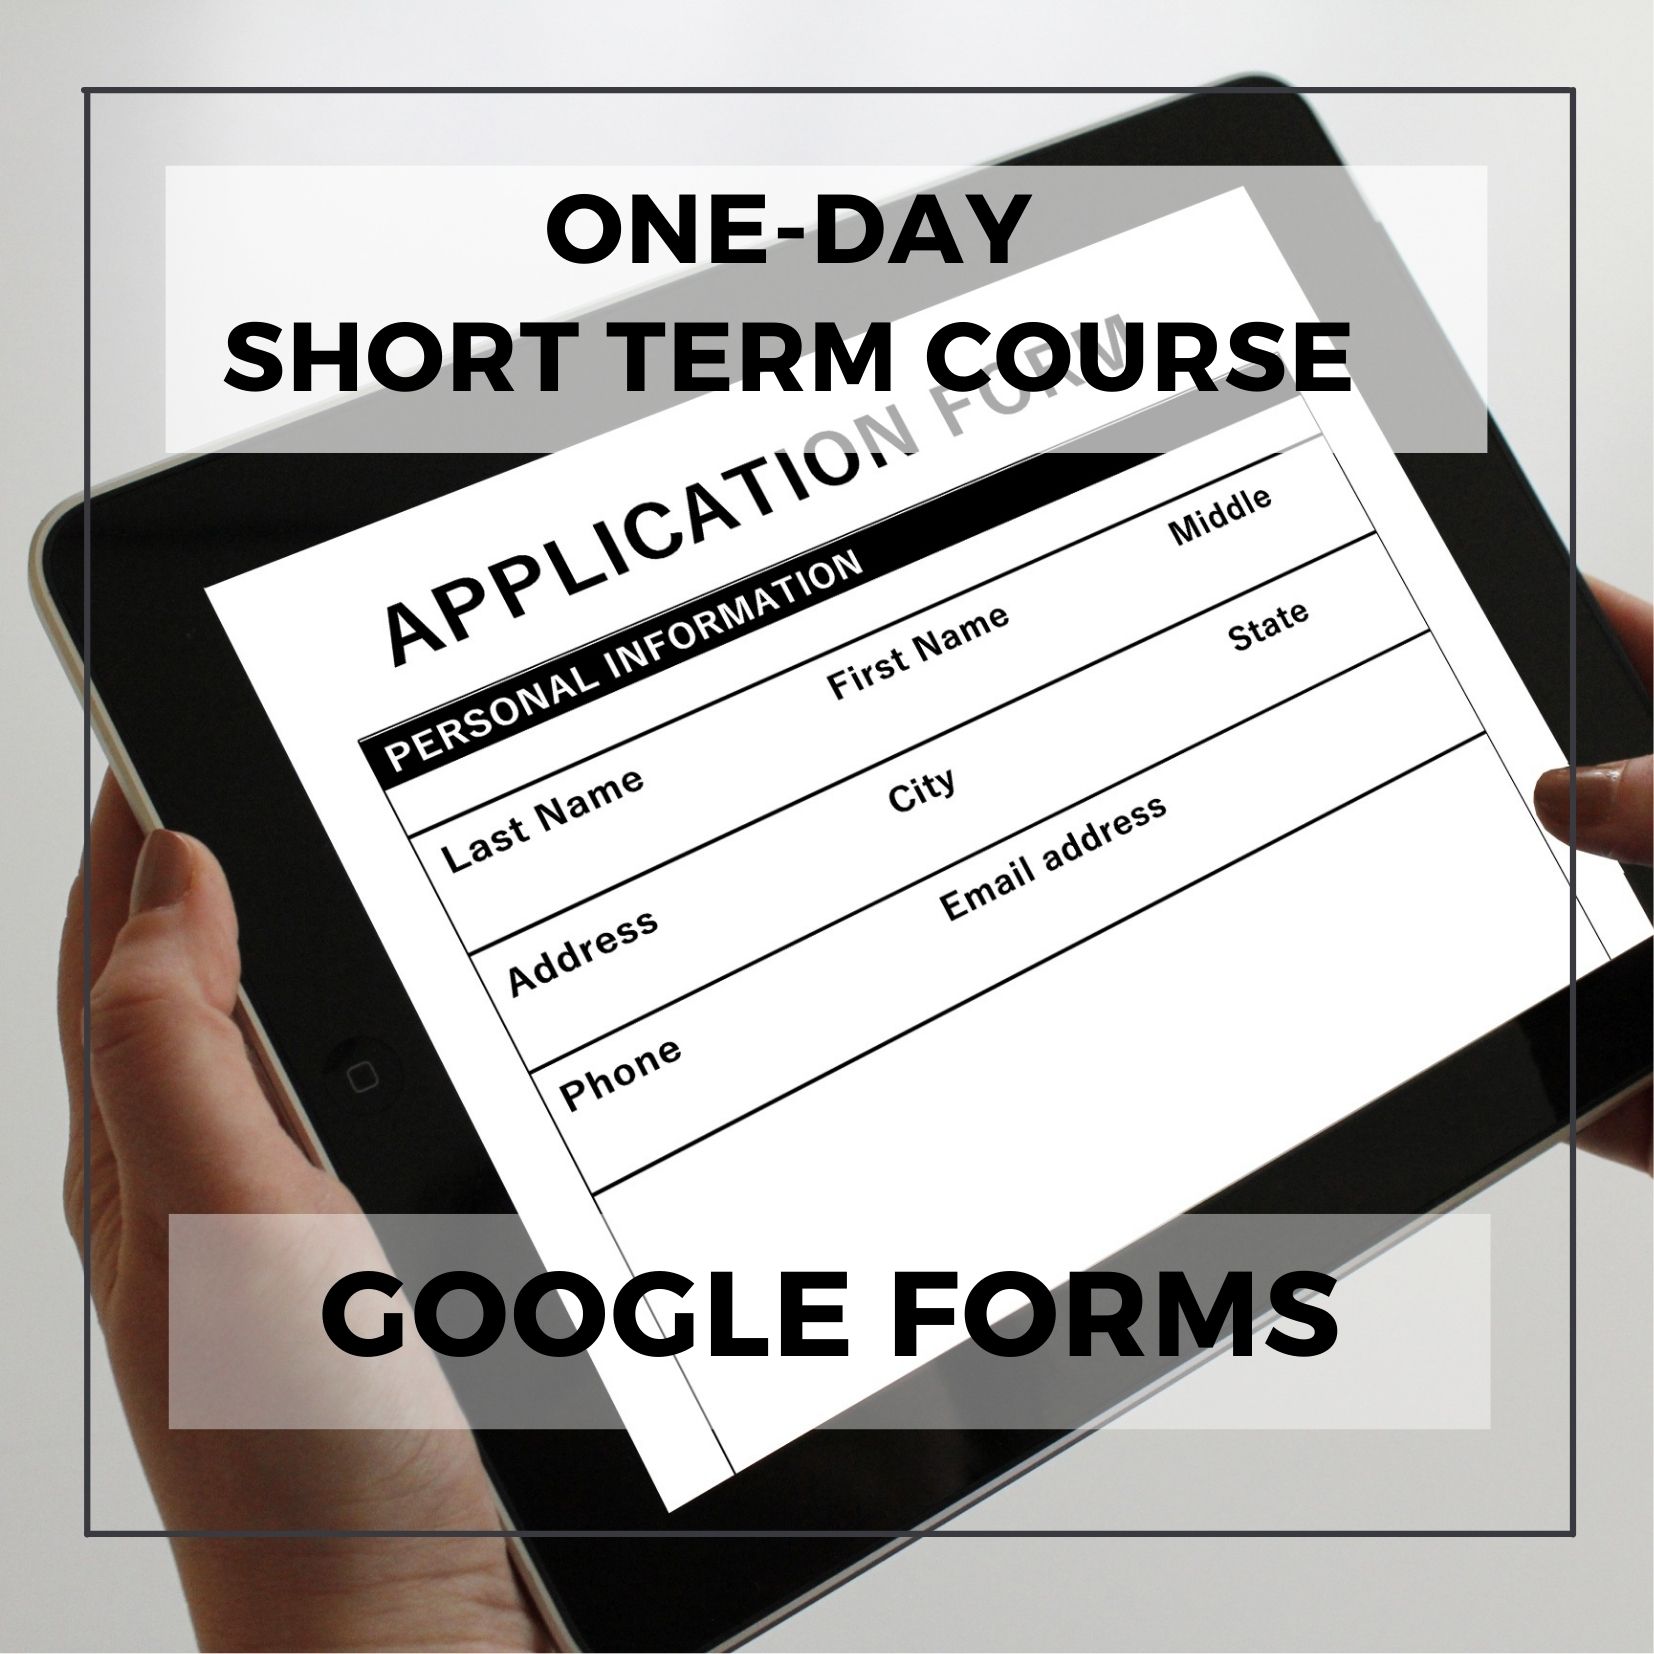 Hands-on session on Google Forms STPO103